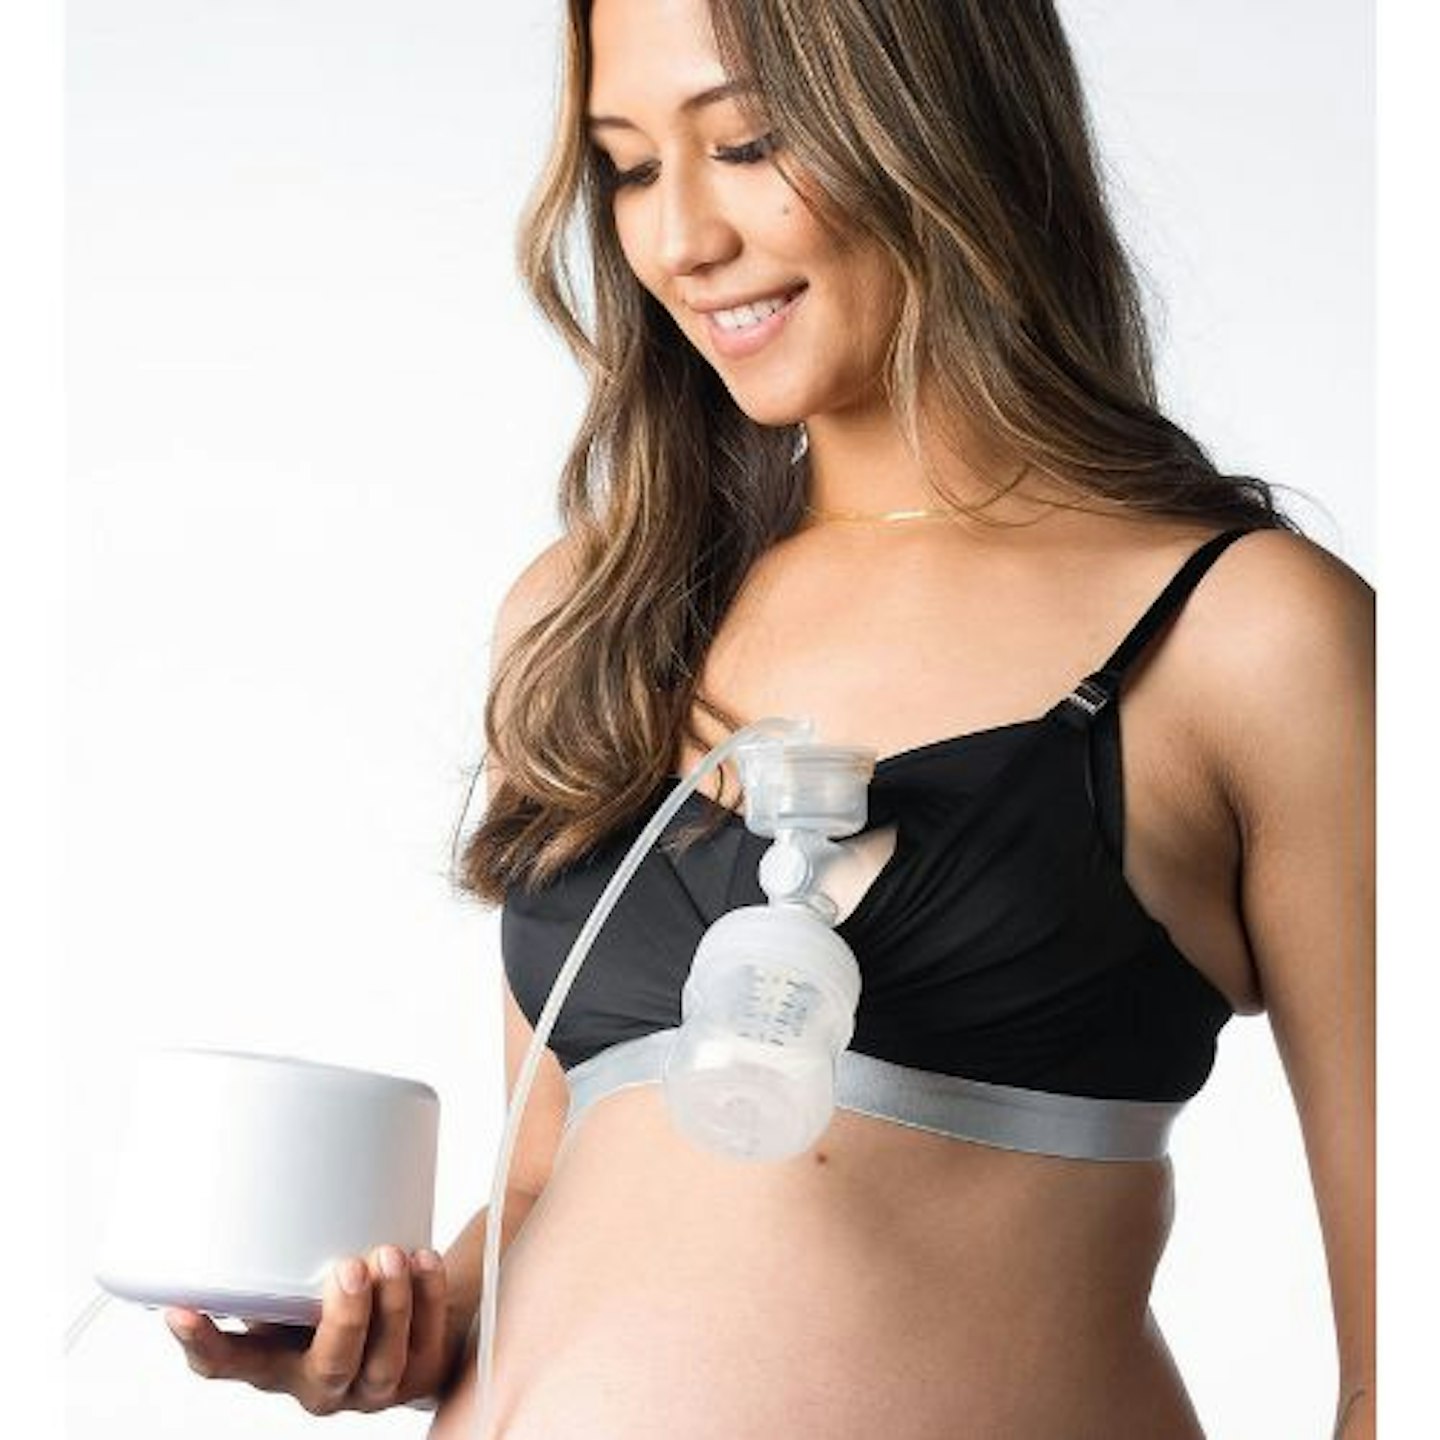 Is a new pumping bra not in the budget right now? Here's a hack that can  turn your nursing bra into a pumping bra in seconds! @shann0